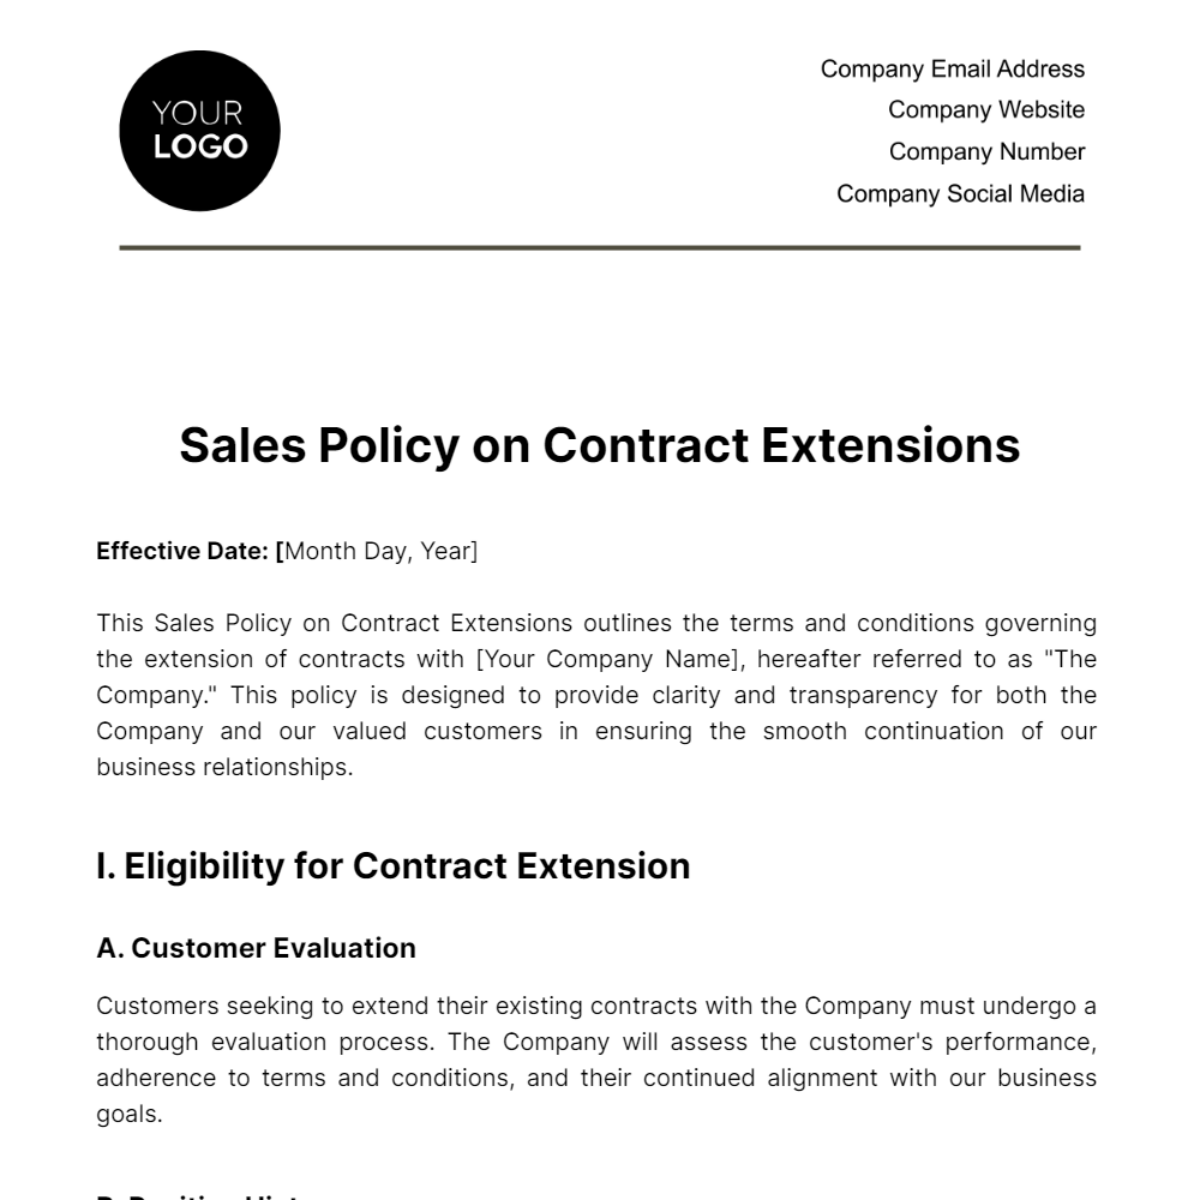 Free Sales Policy on Contract Extensions Template